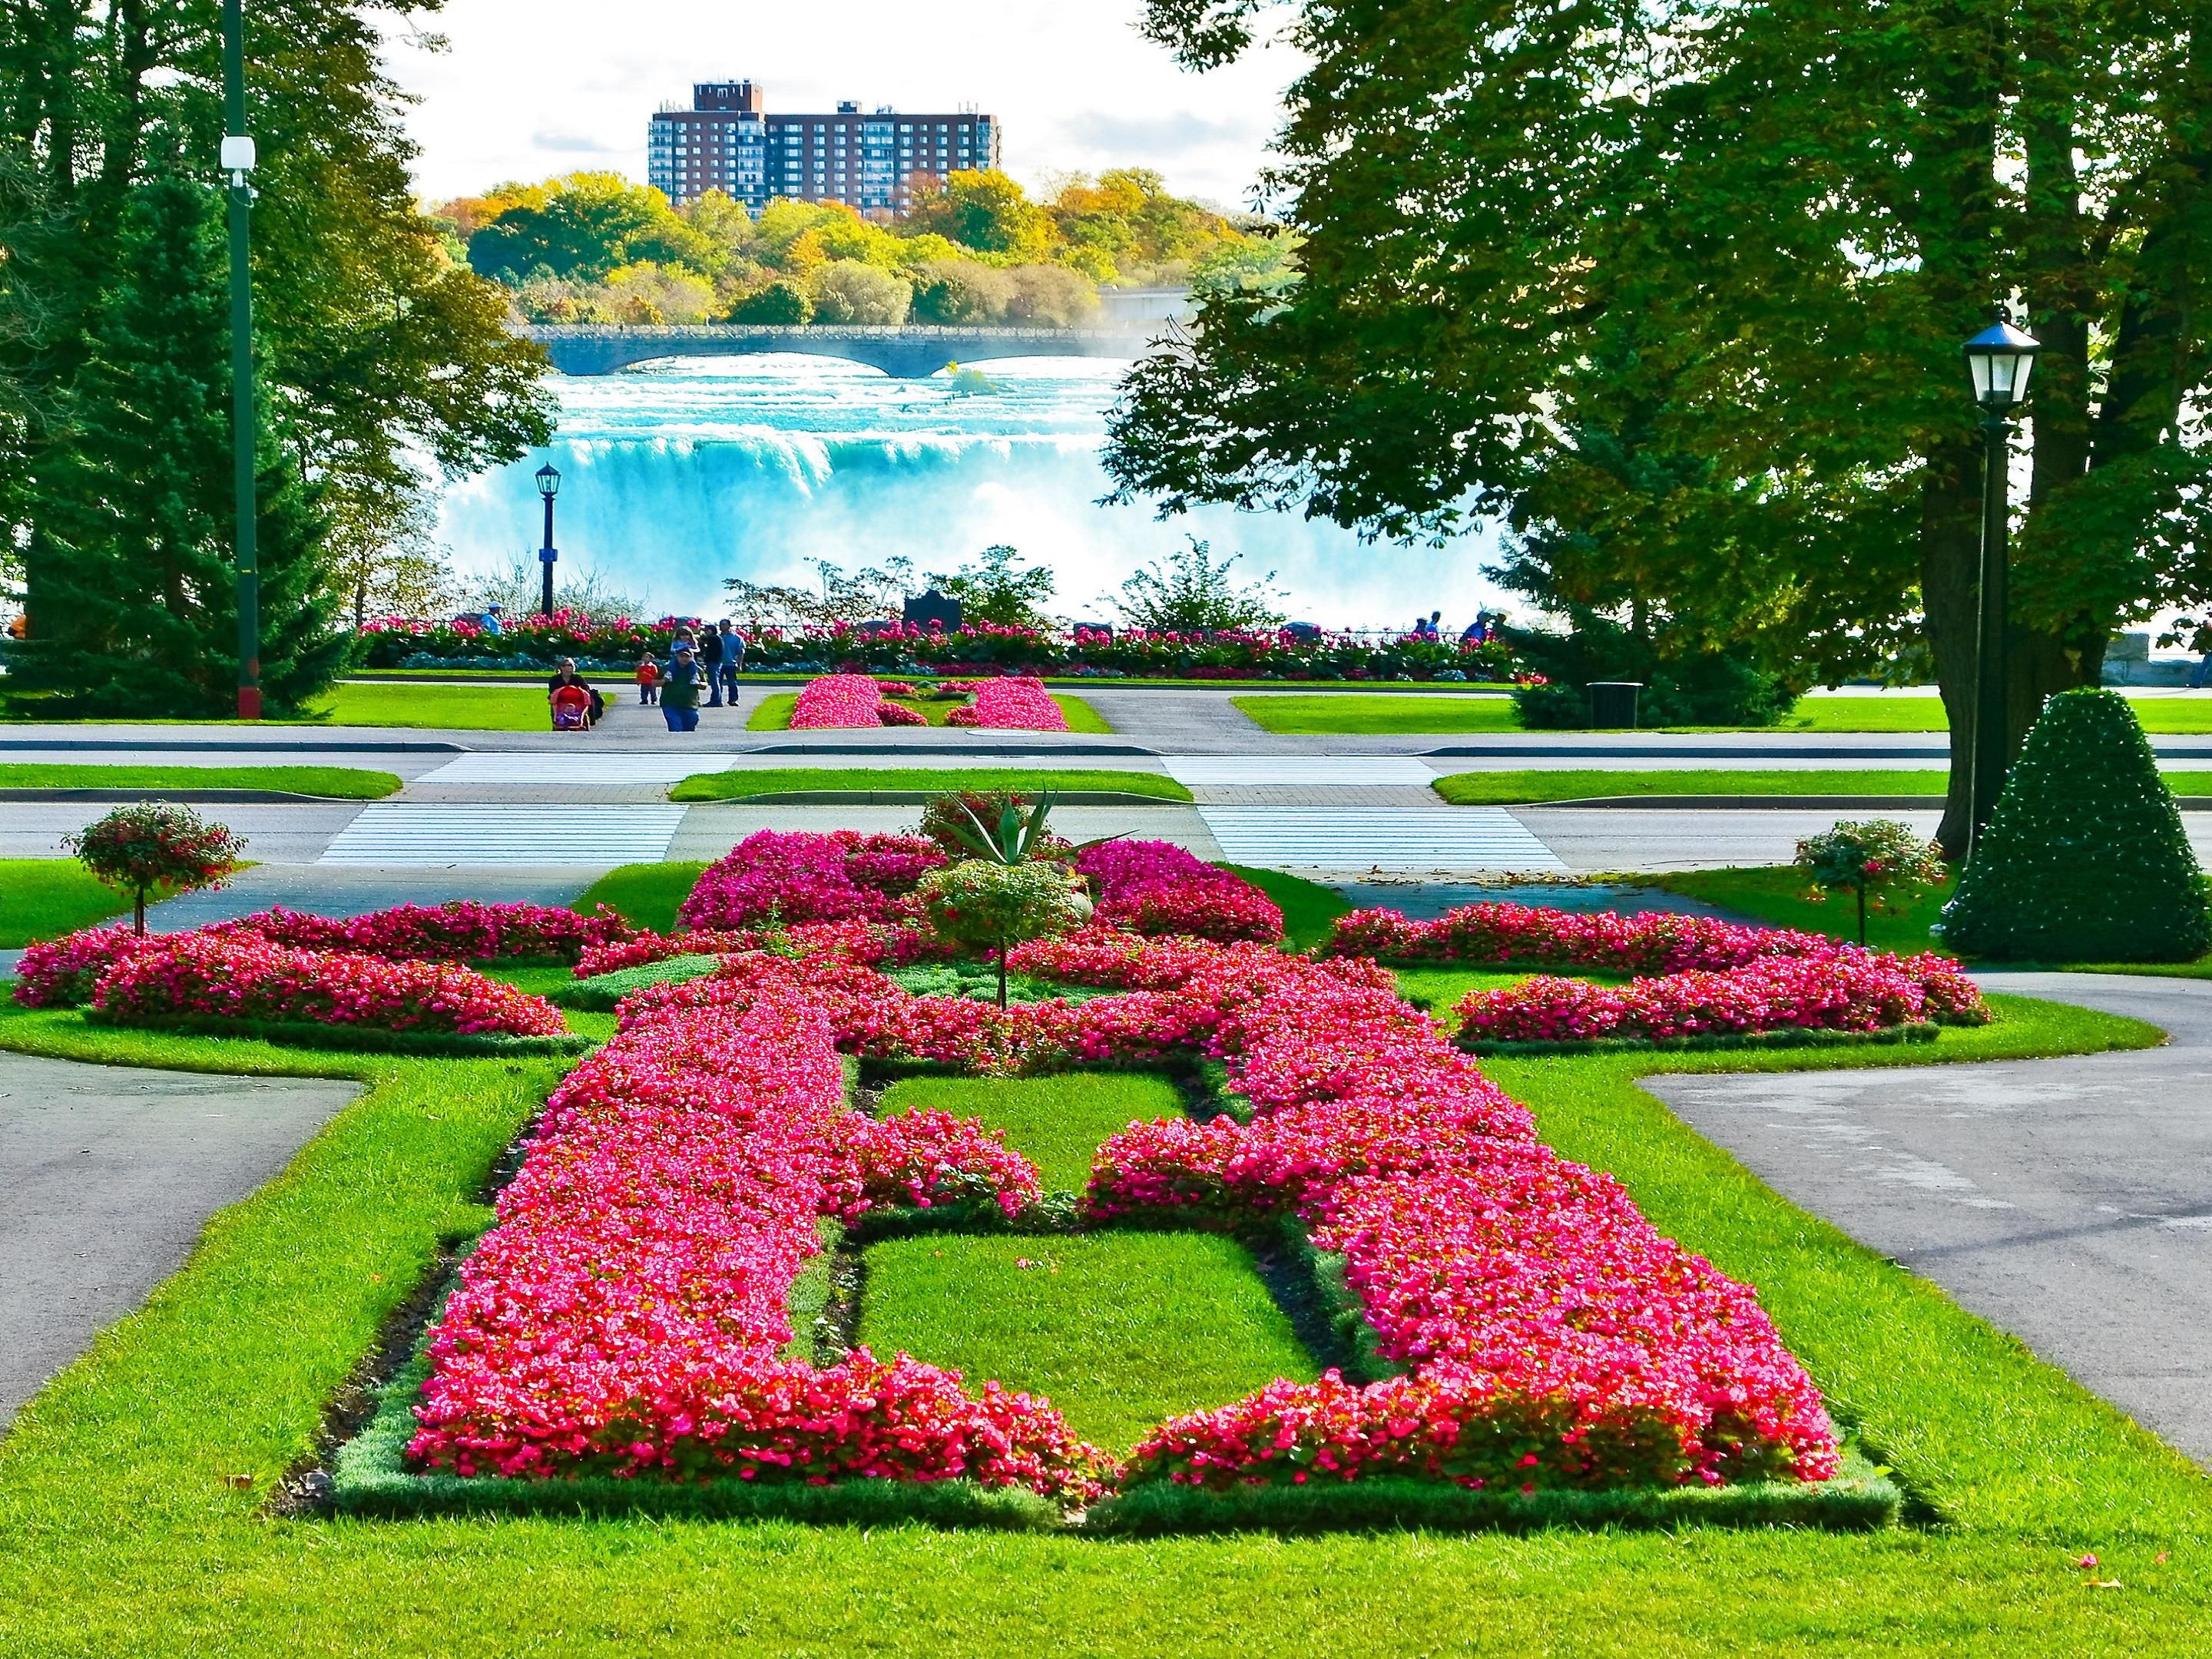 We've put together a list of our favourite things to do in the Niagara Falls area and we're the perfect home base while you explore all the beauty of the region. From Queen Victoria Park to gorgeous trails and of course, the wonderment of Niagara Falls. Book a "Staycation" today, we've got flexible offers waiting for you.